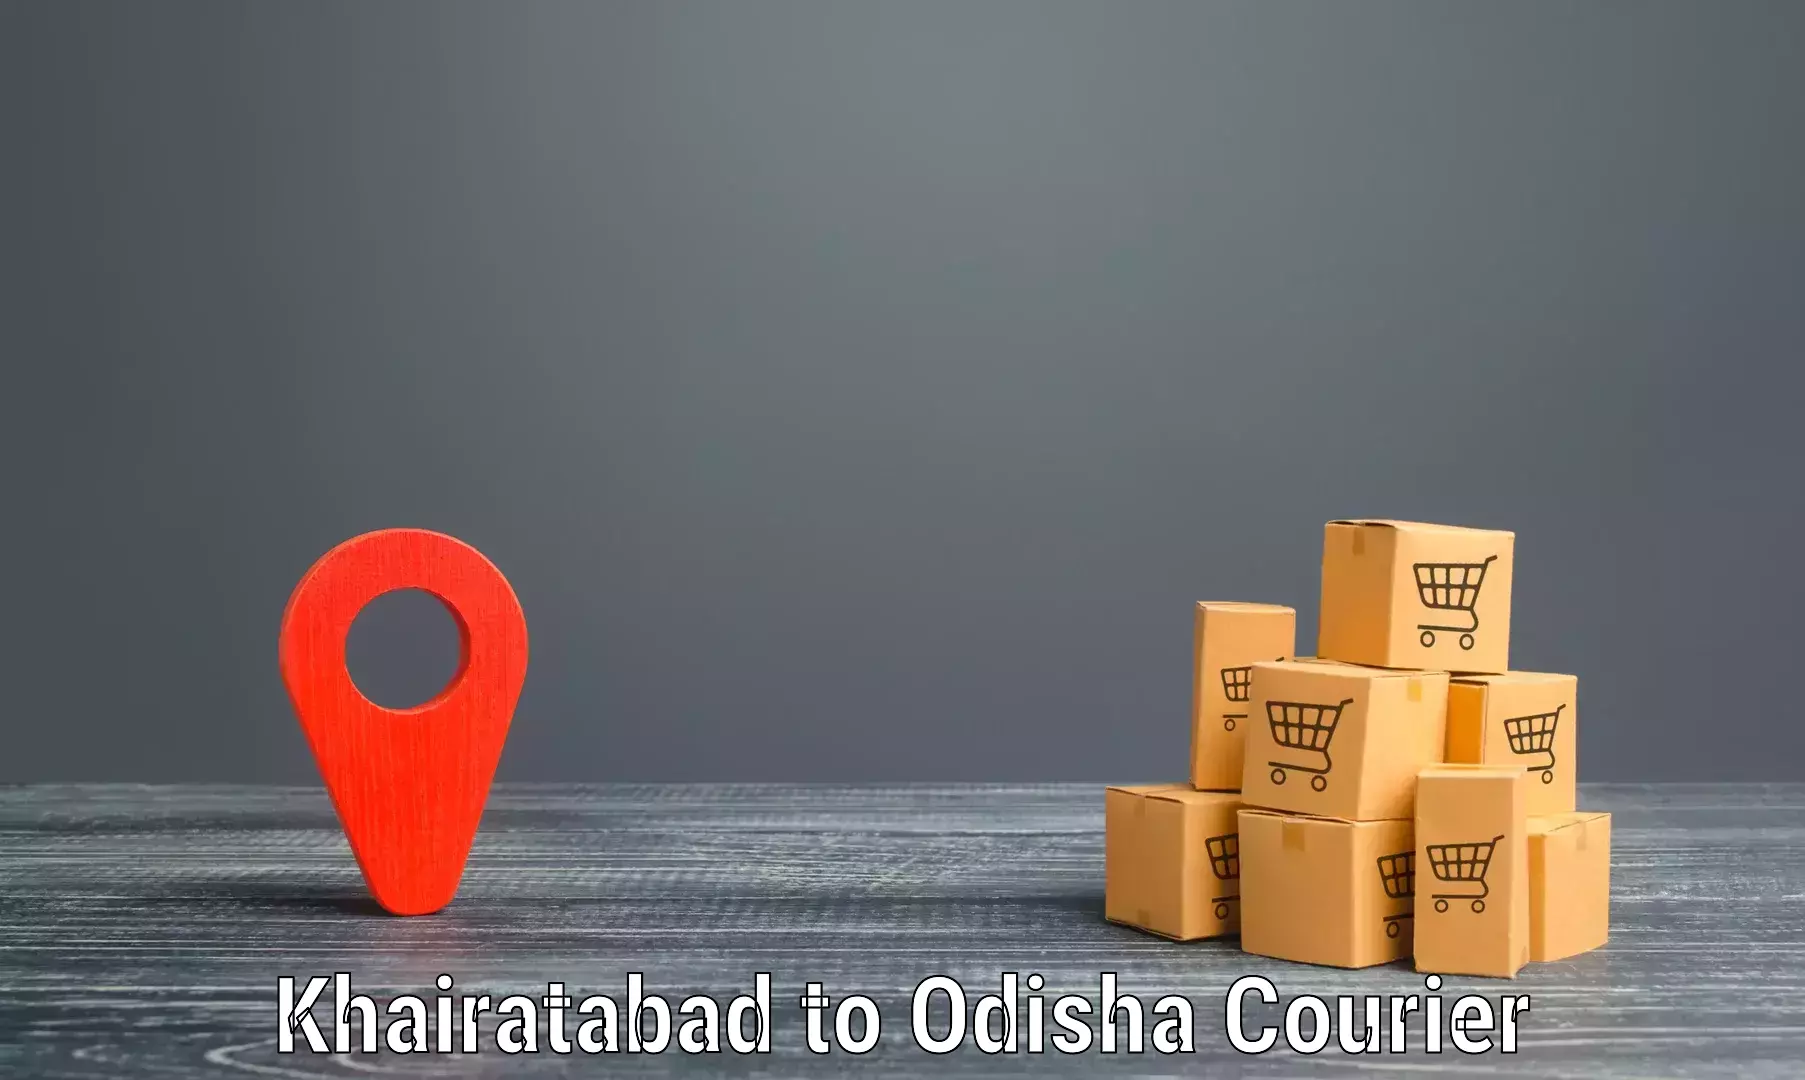 Global parcel delivery Khairatabad to Dhamanagar